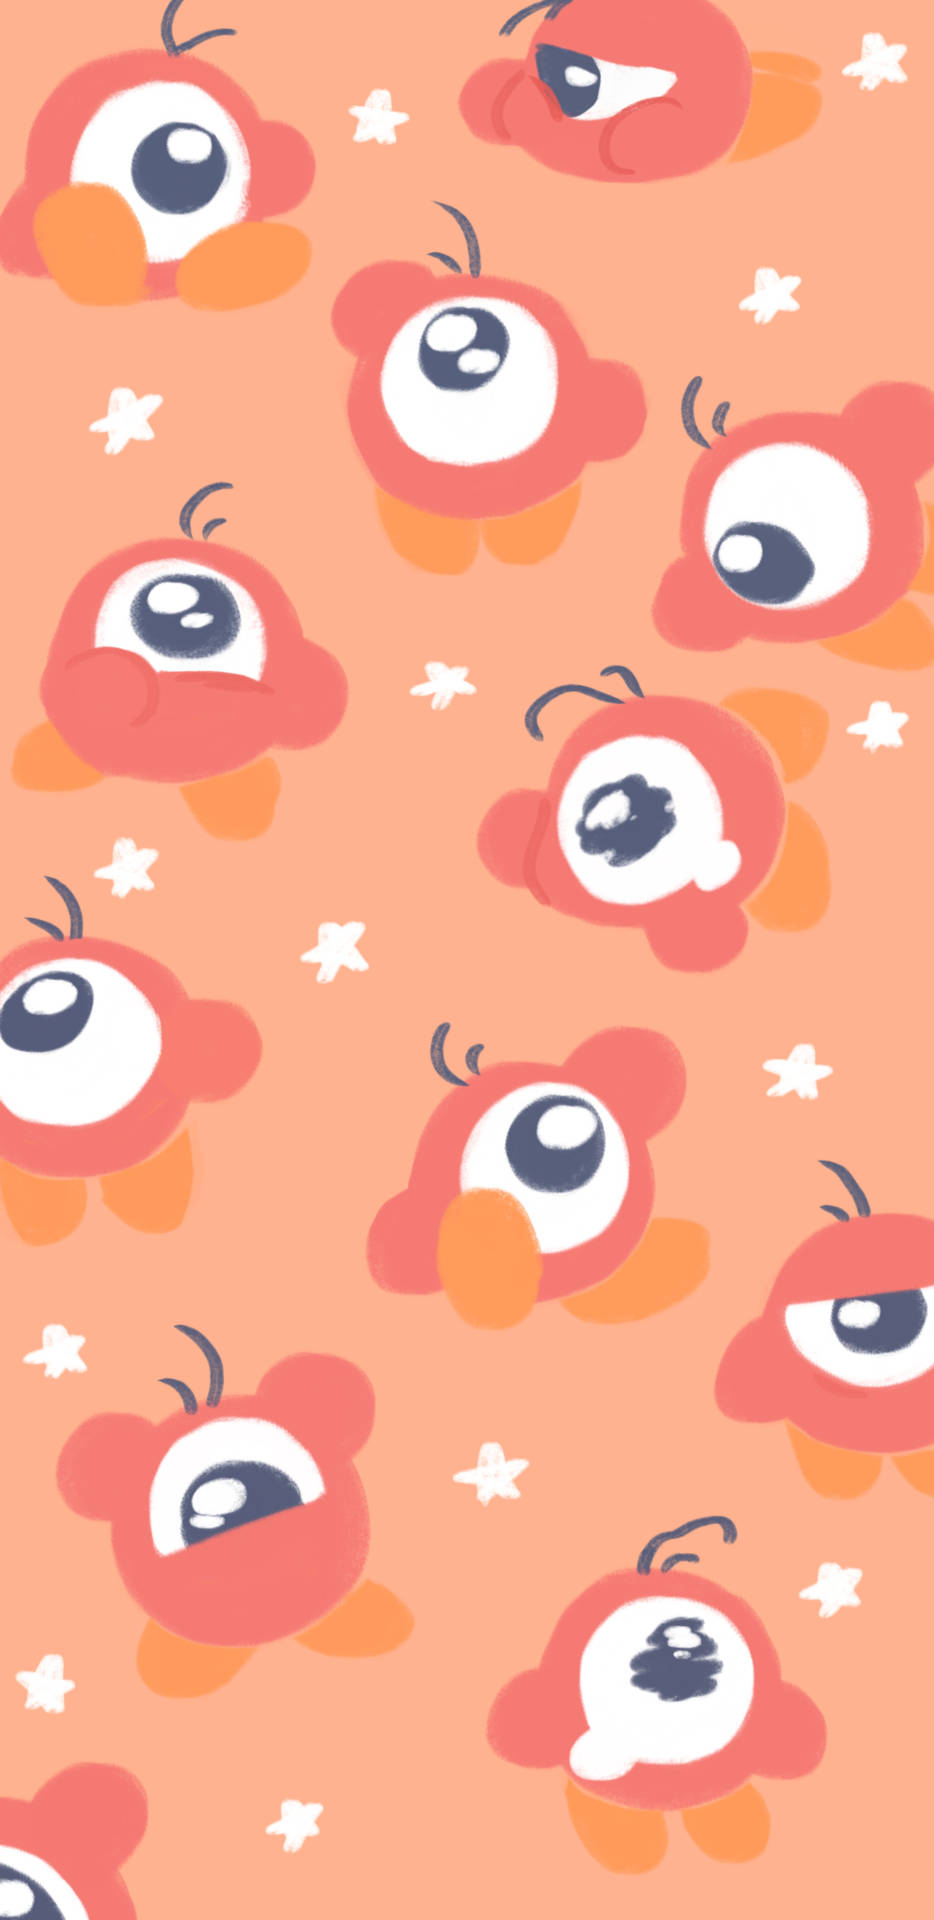 A Cute Kirbey Character with a Cool Pink Aesthetic Wallpaper